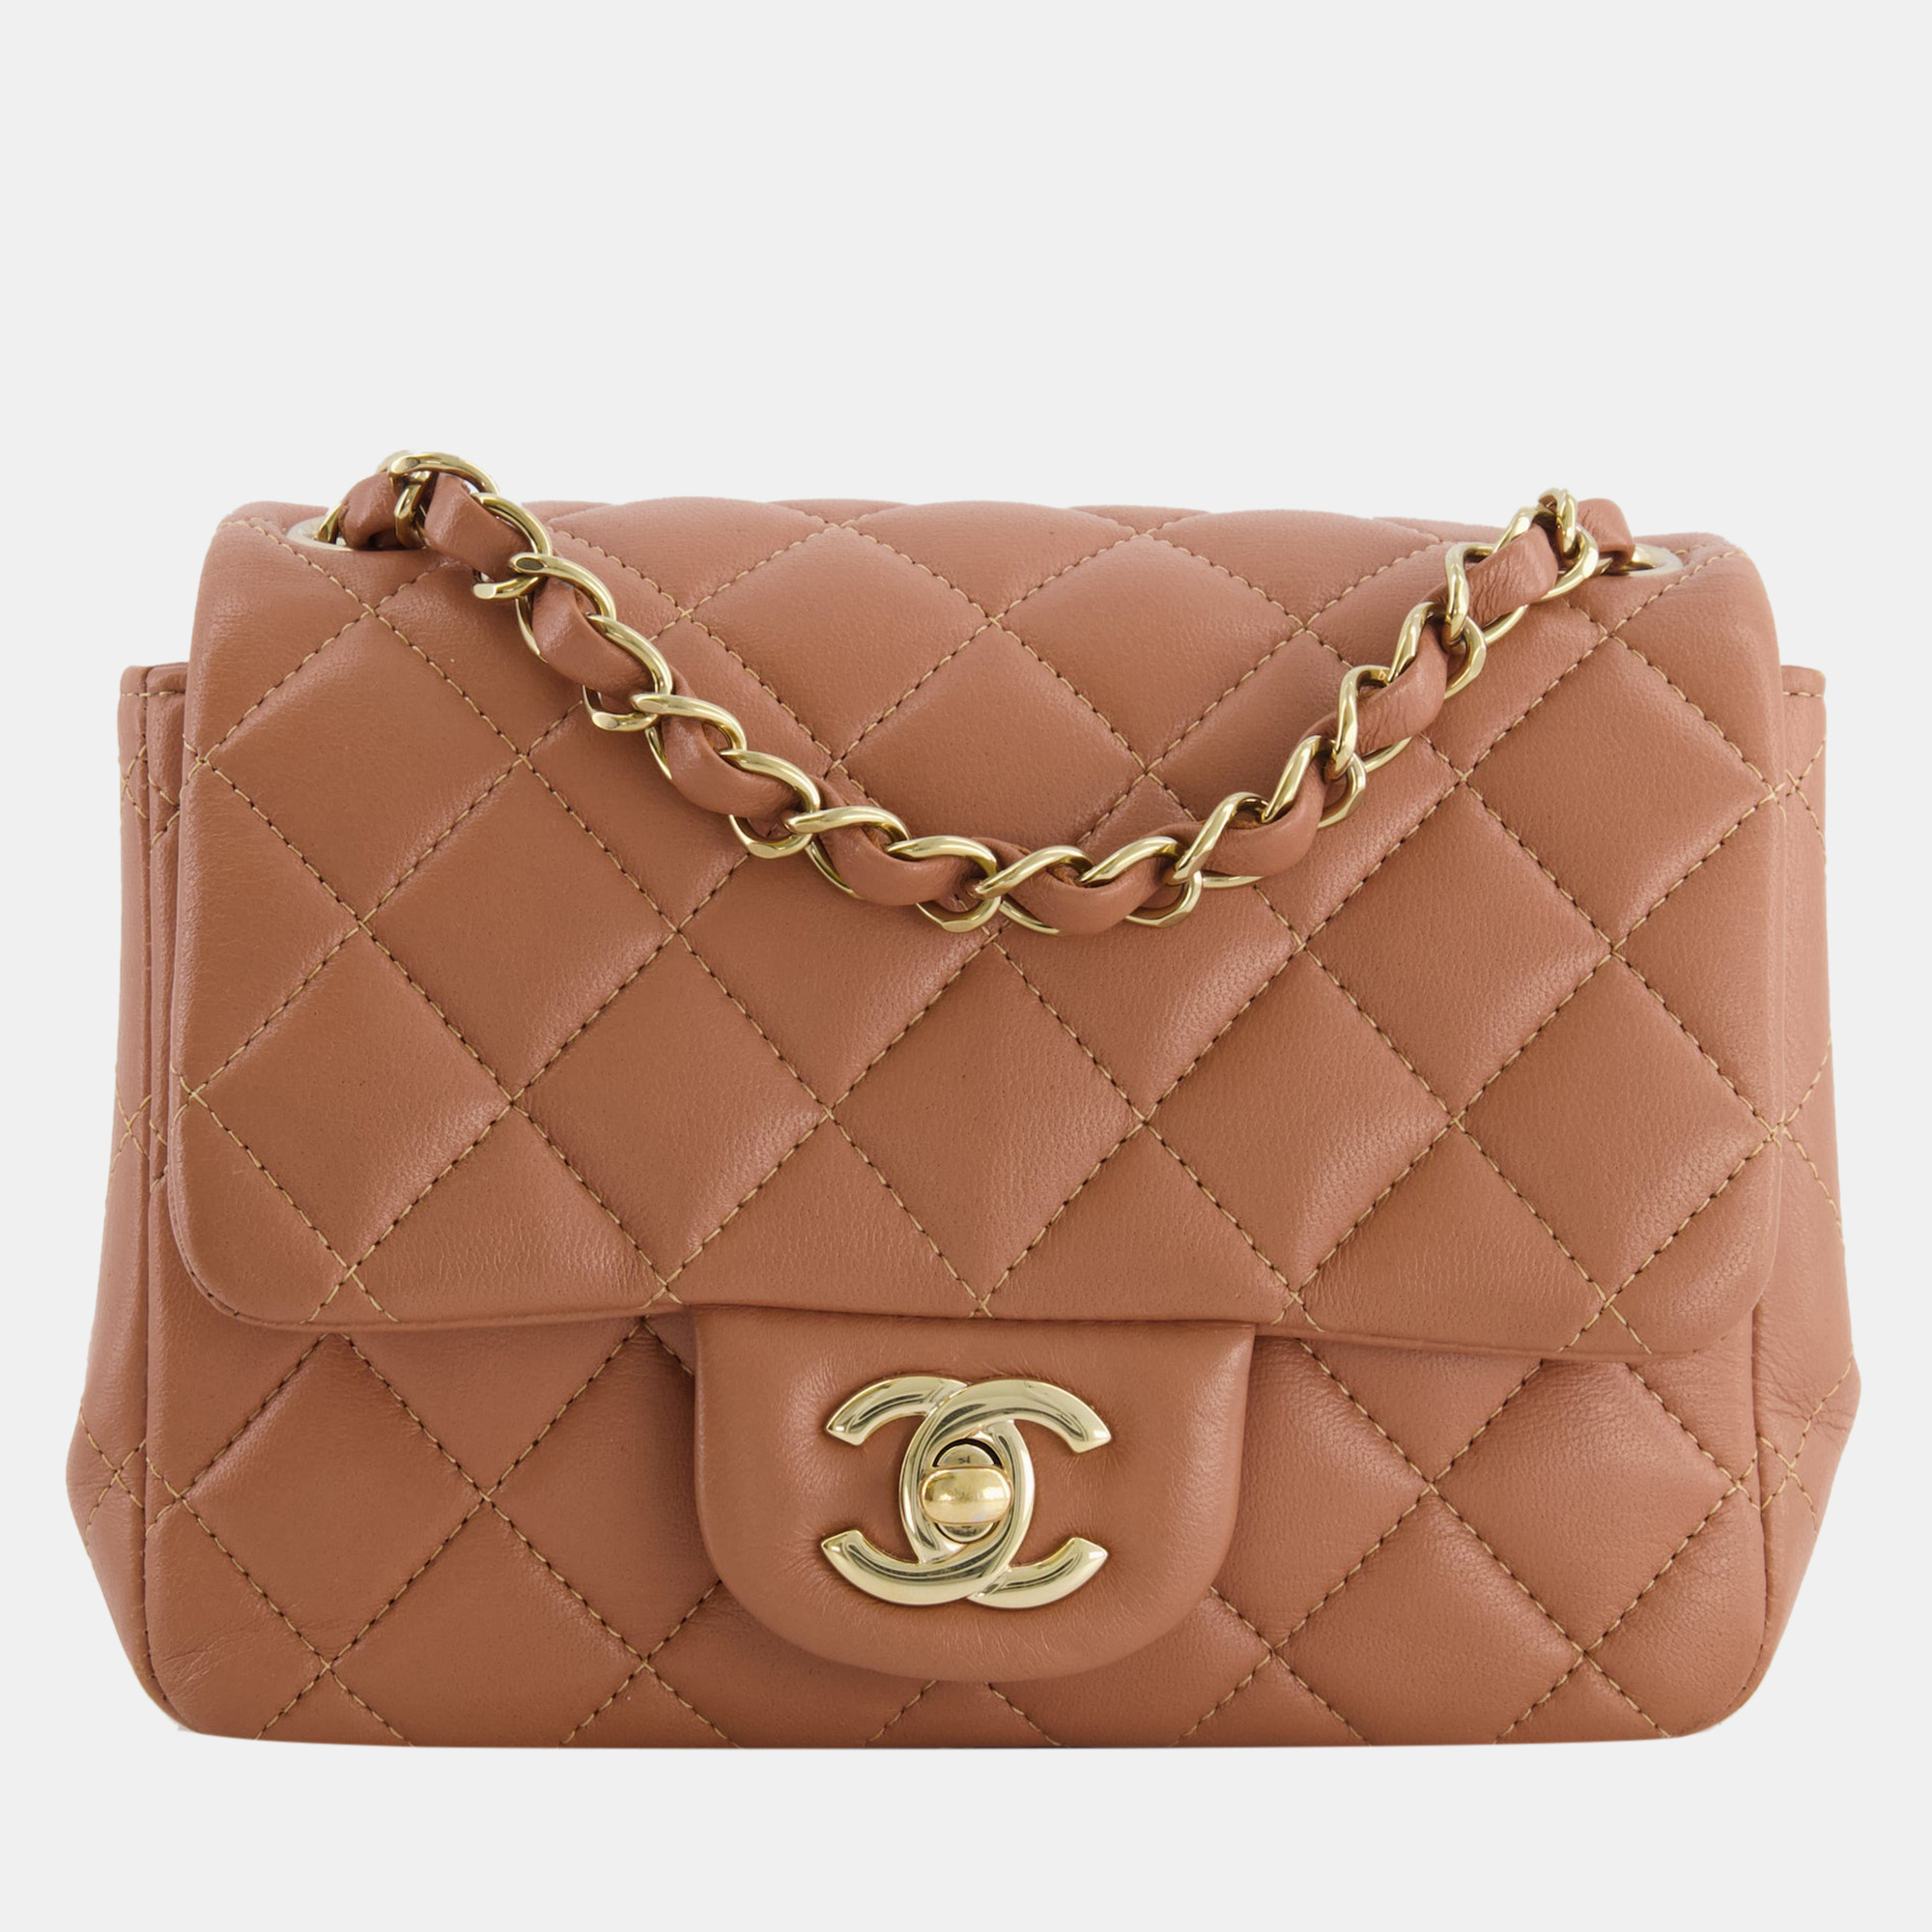 Chanel Caramel Mini Square Bag In Lambskin Leather With Champagne Gold Hardware